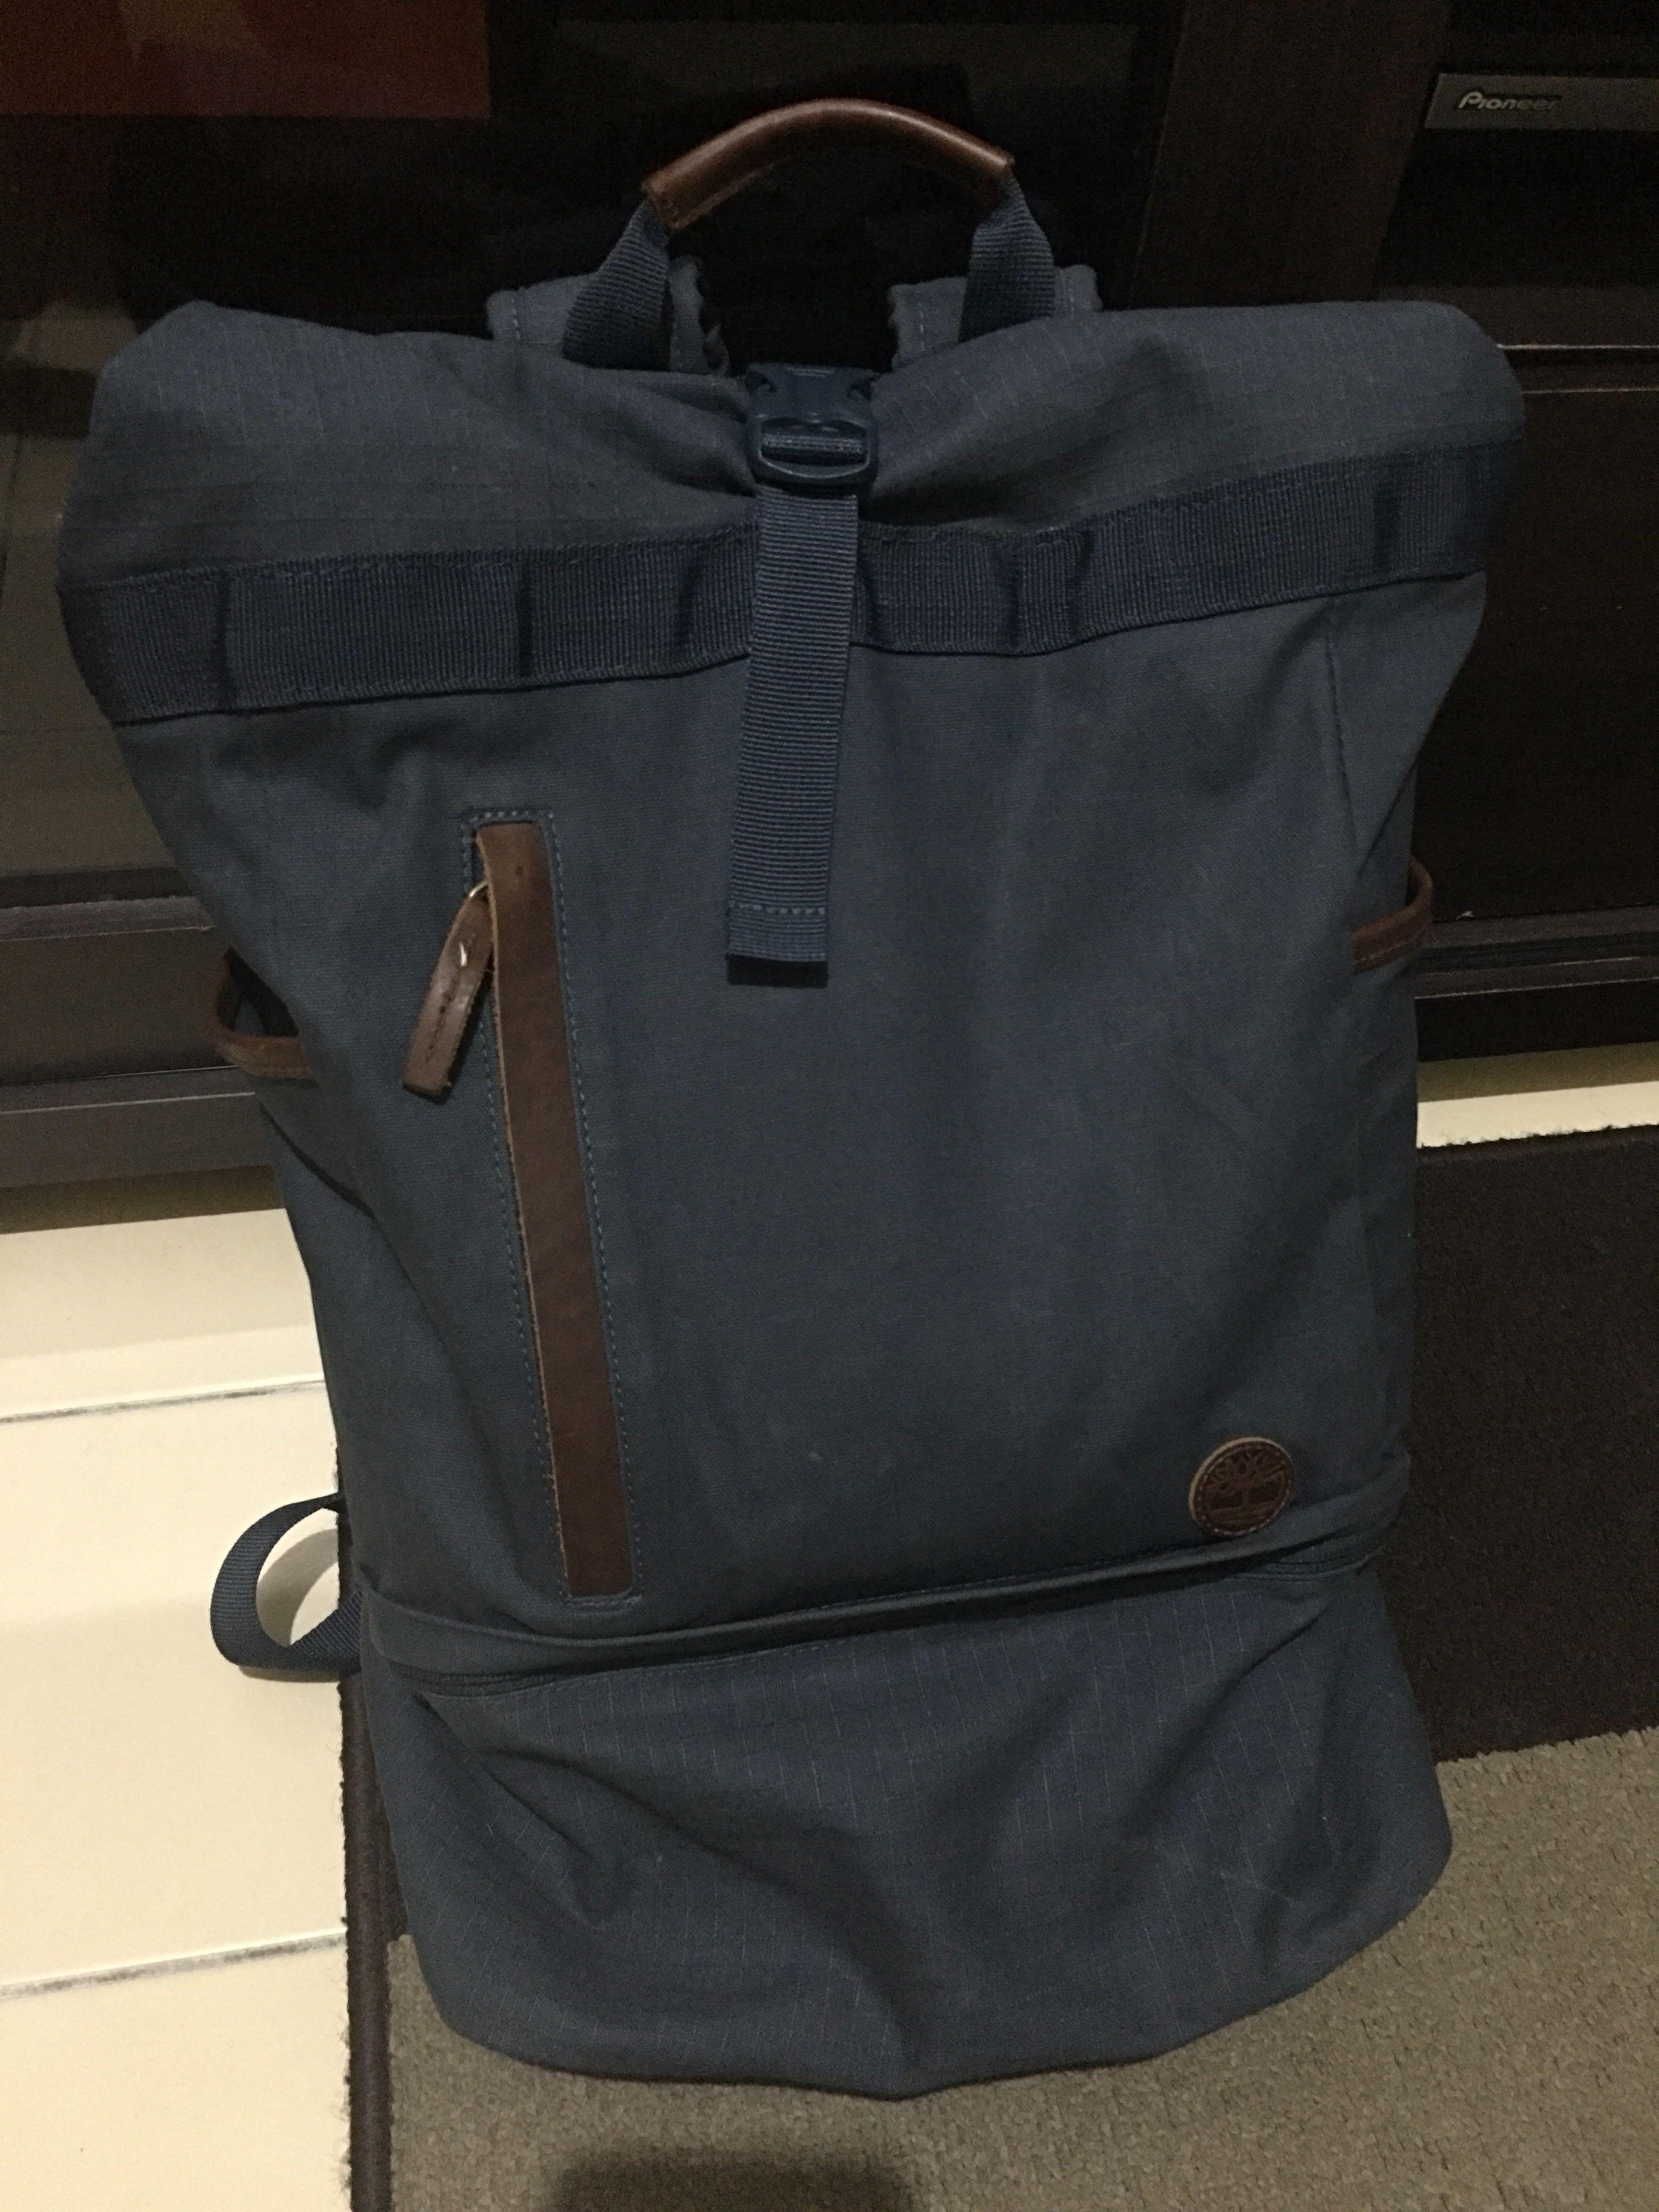 Top Backpack Timberland, Men's Fashion, Bags, Backpacks on Carousell